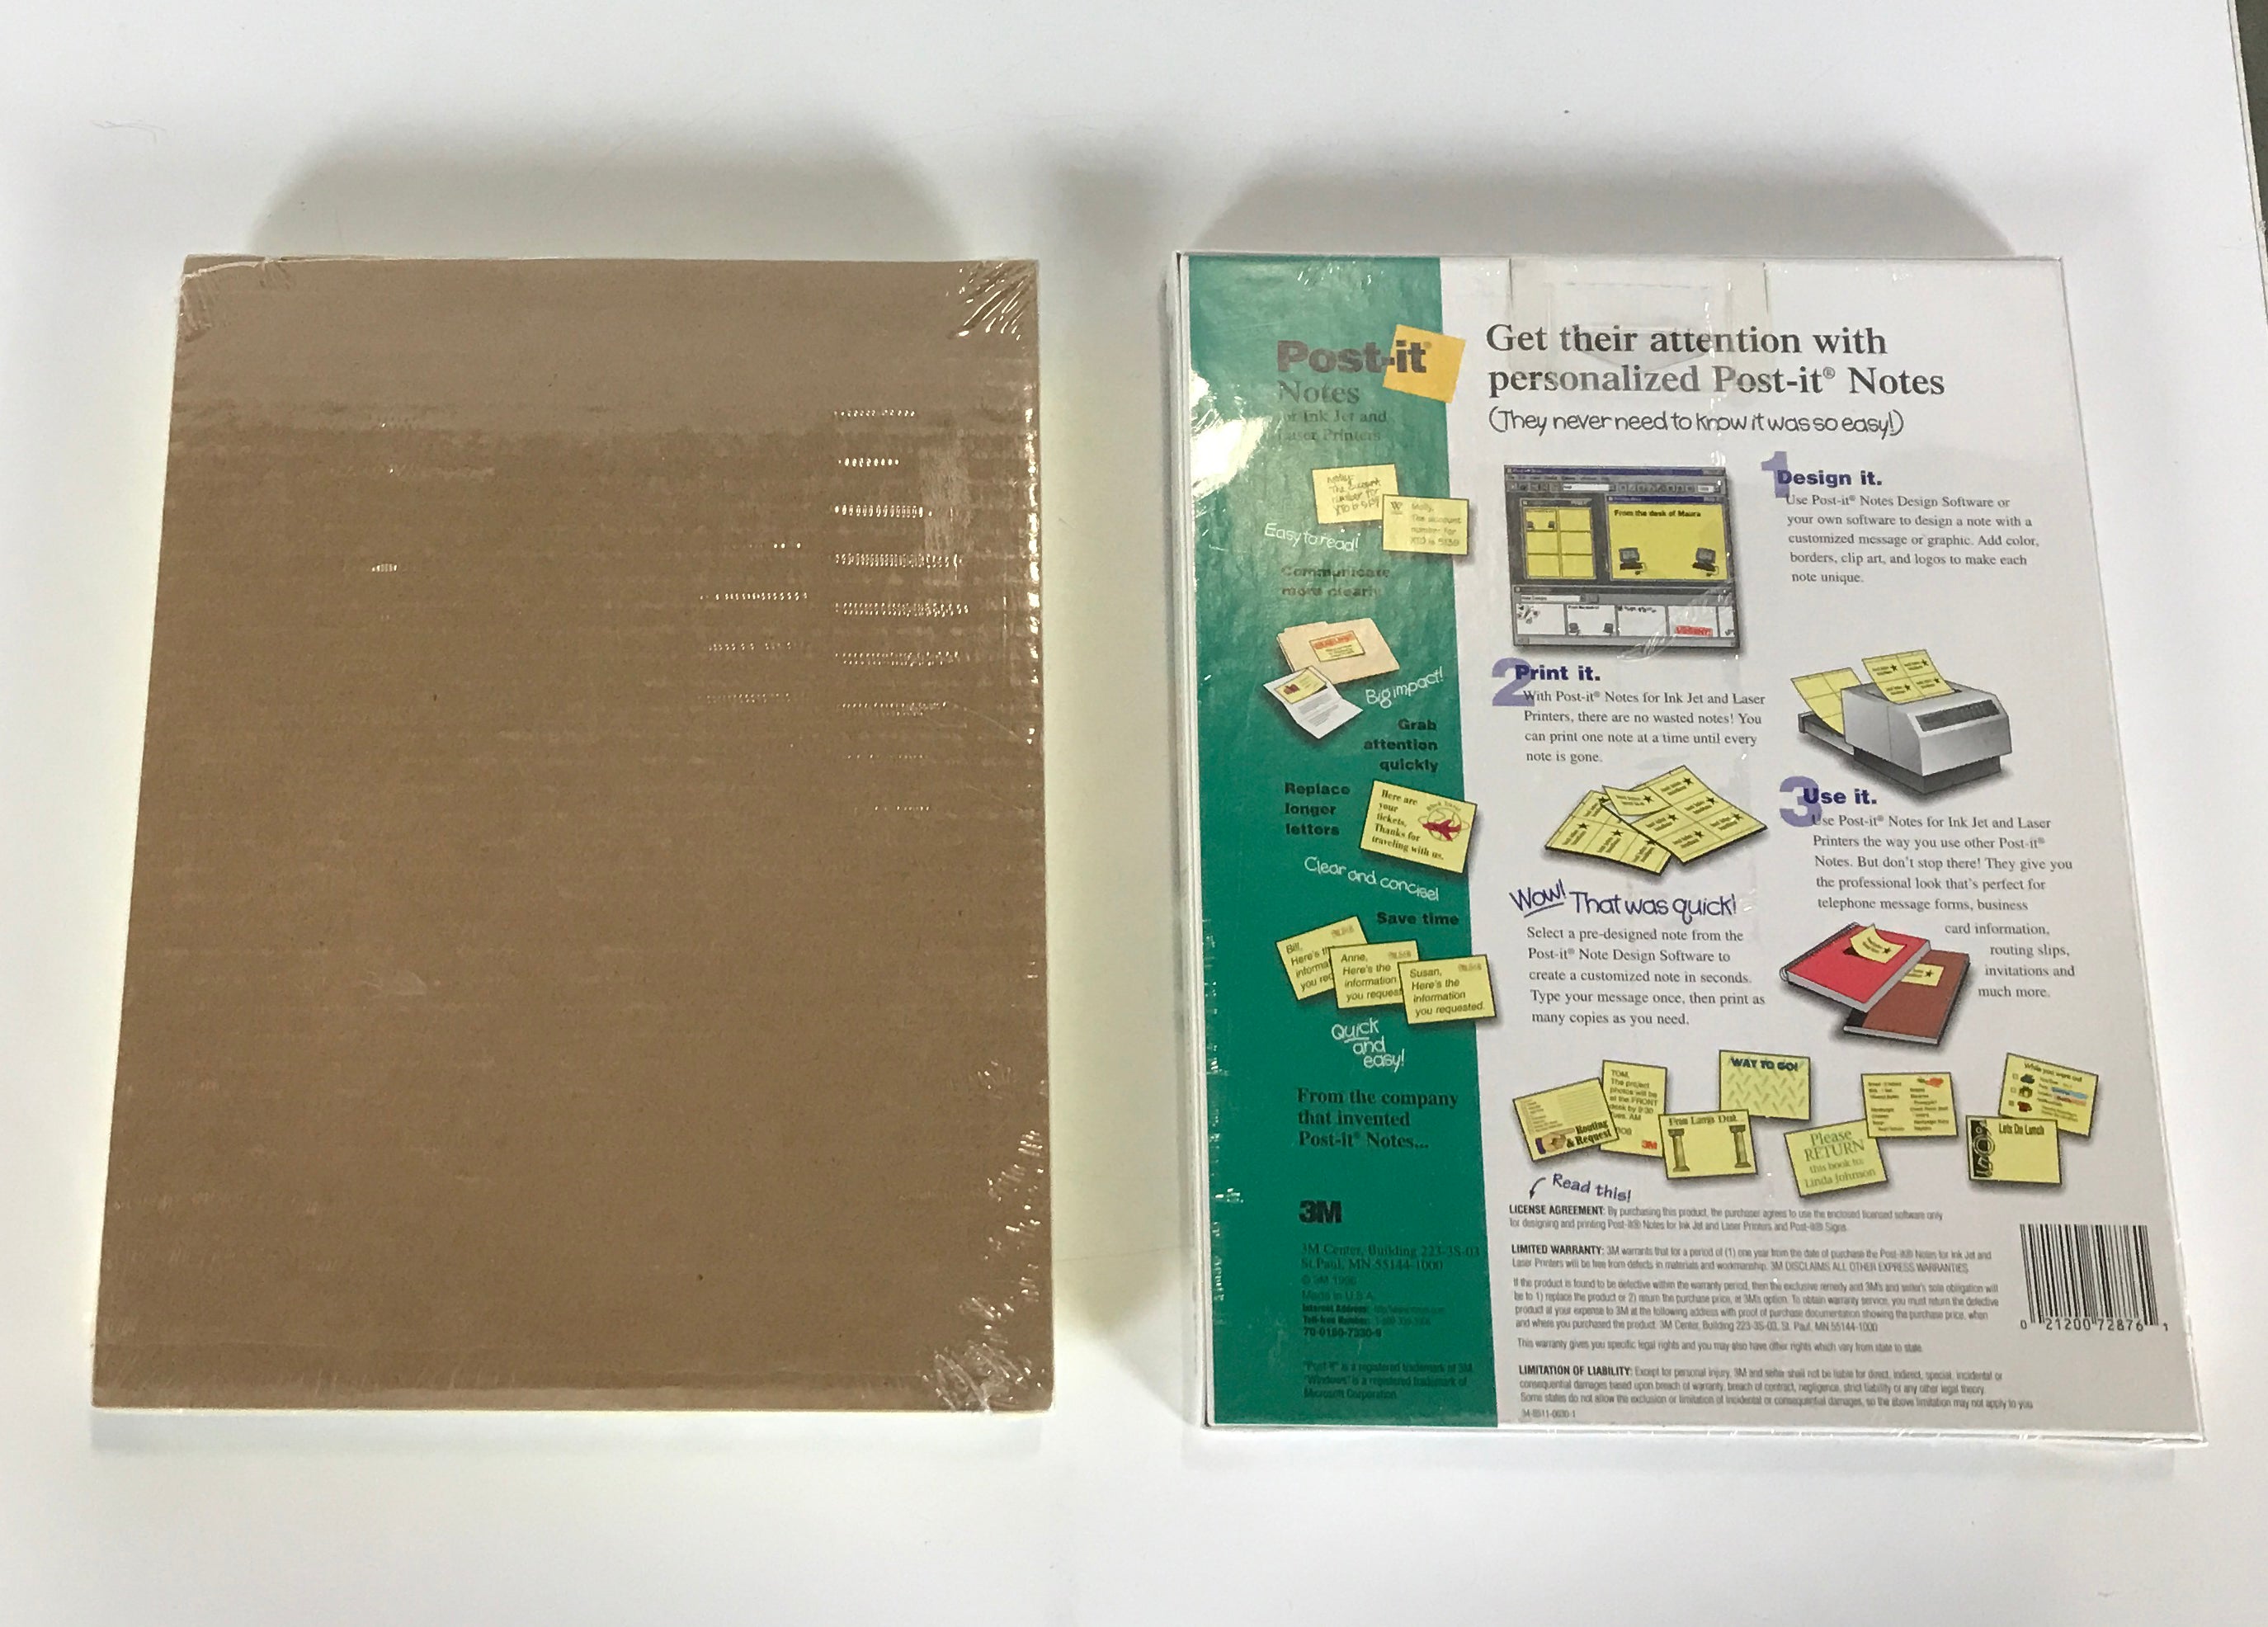 3M Post-it Notes for Printers Starter Kit